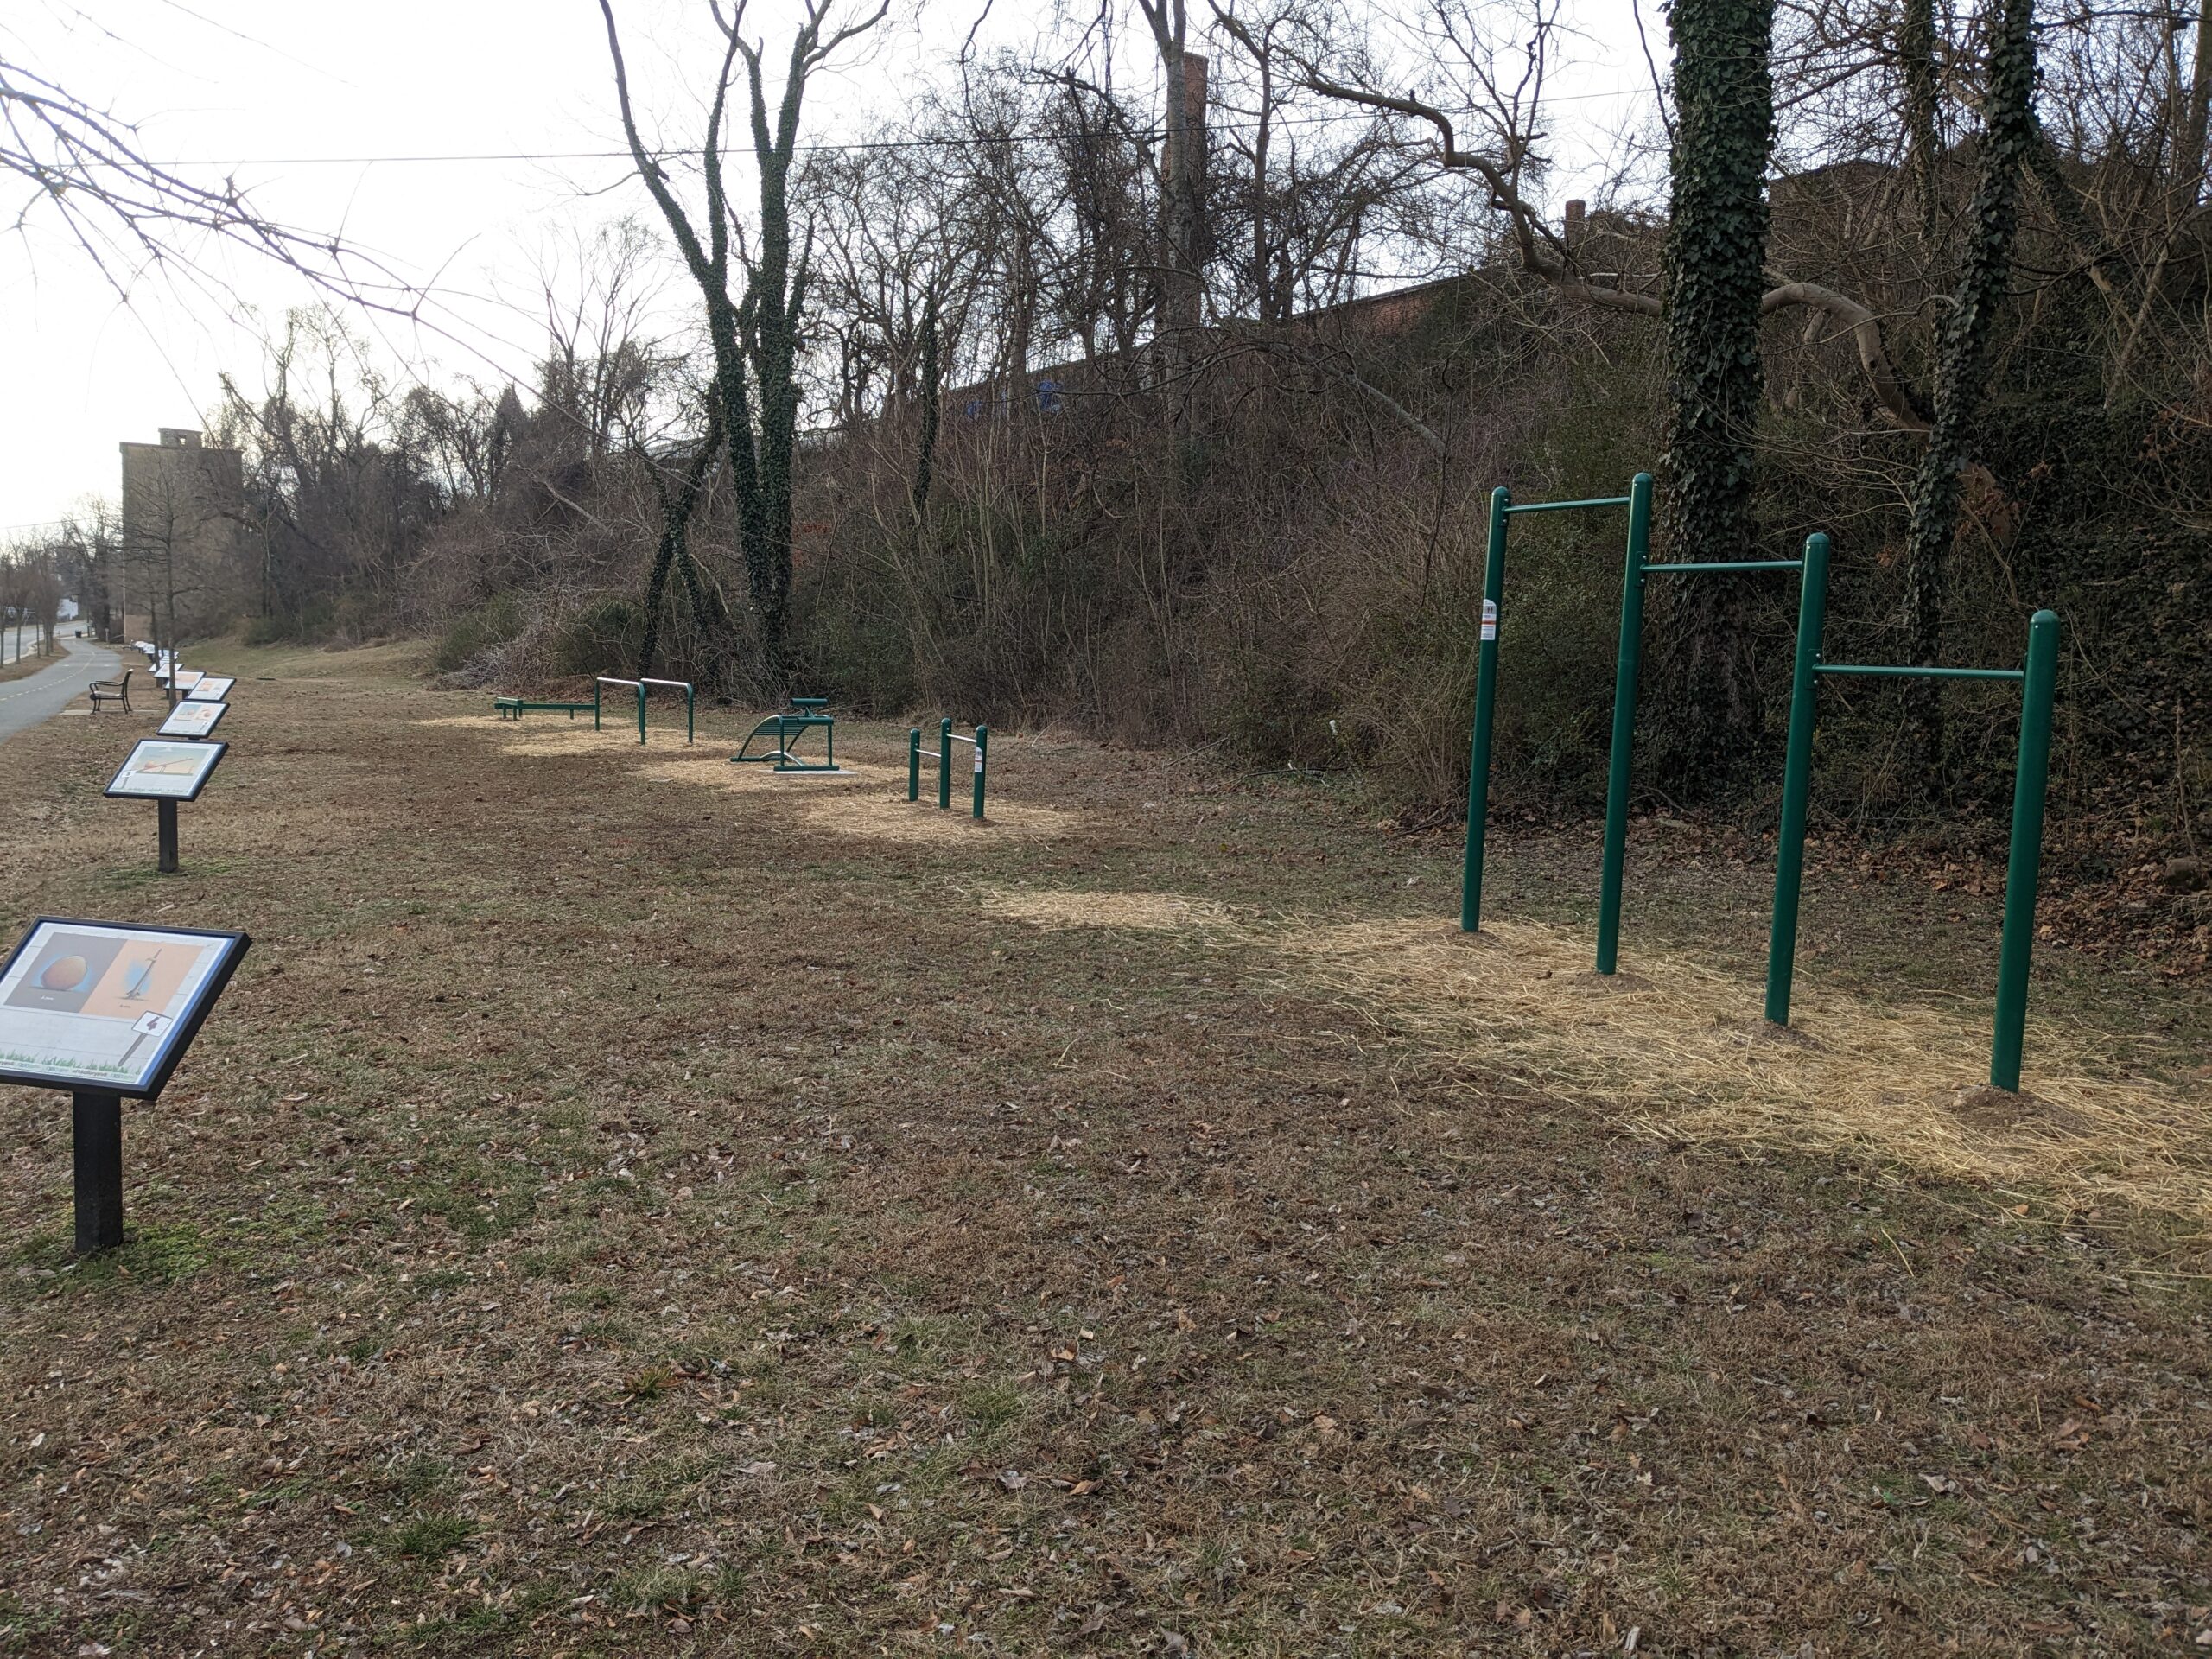 A picture of some green fitness equipment in front of a hillside. The lawn is brown and the trees are bare since it is winter.